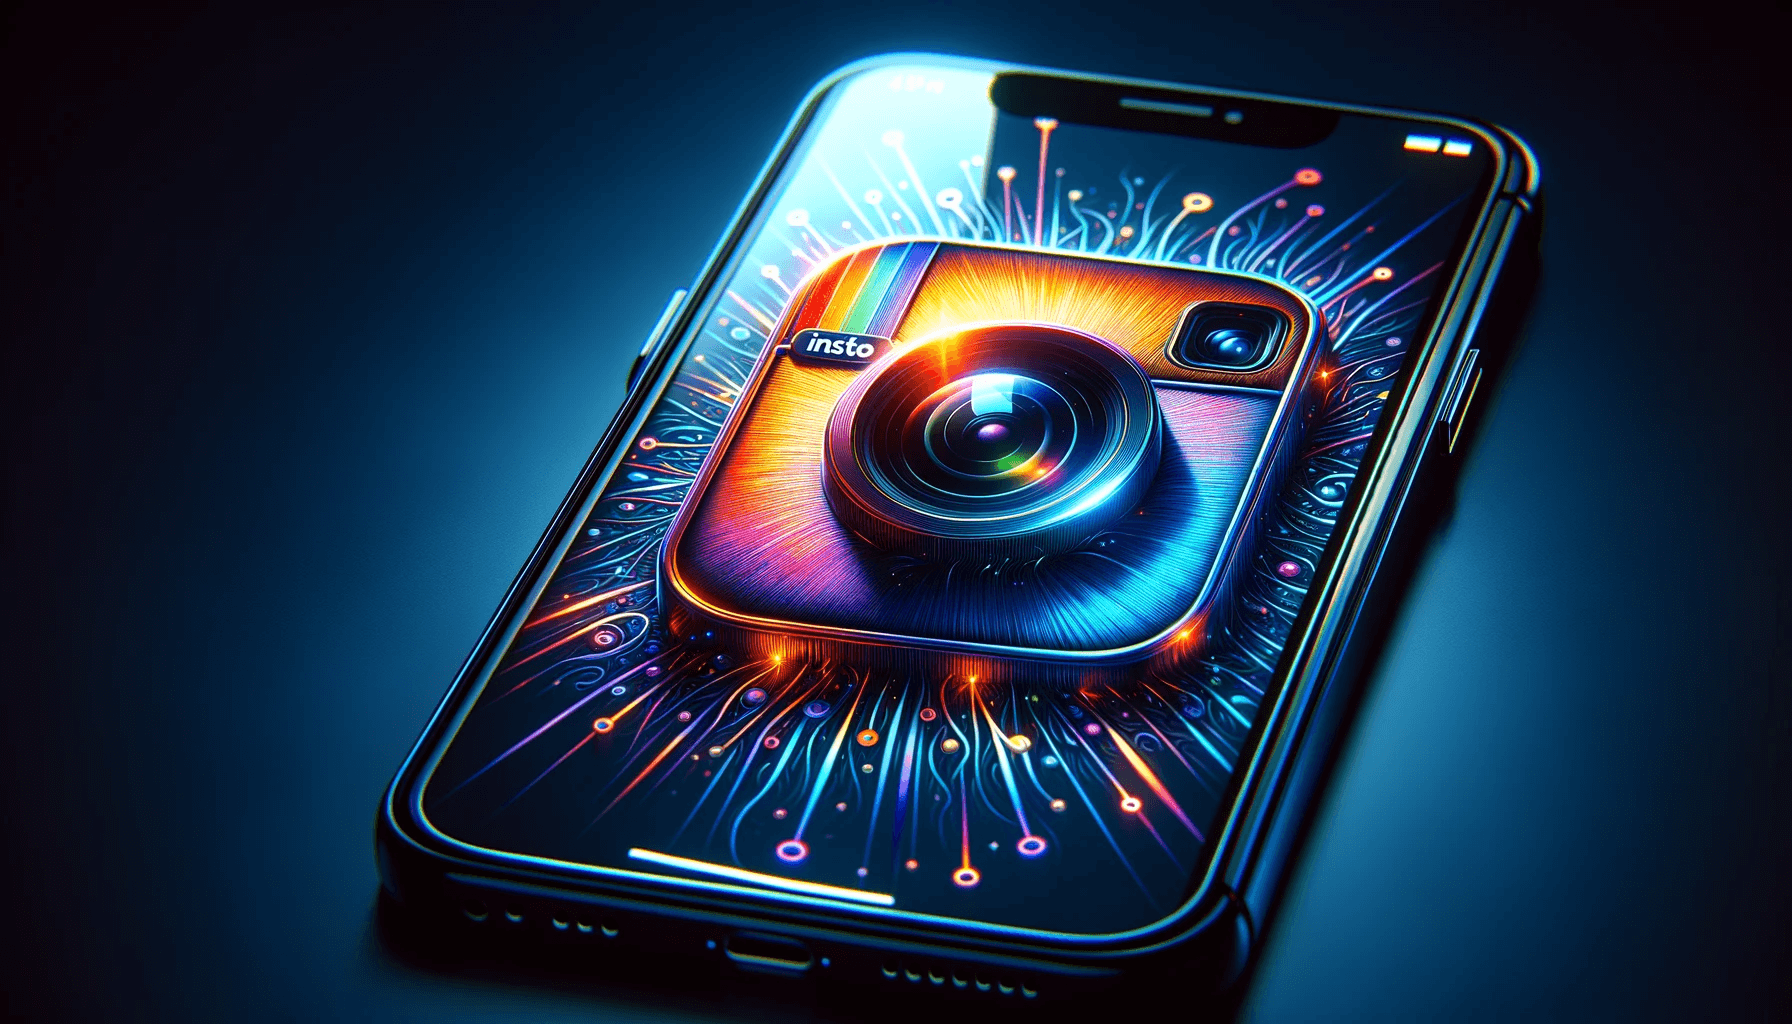 DALL·E 2023 11 17 12.56.22 A stunning digital illustration of the Instagram icon on an iPhone screen. The illustration showcases the iPhone with a high resolution display promi